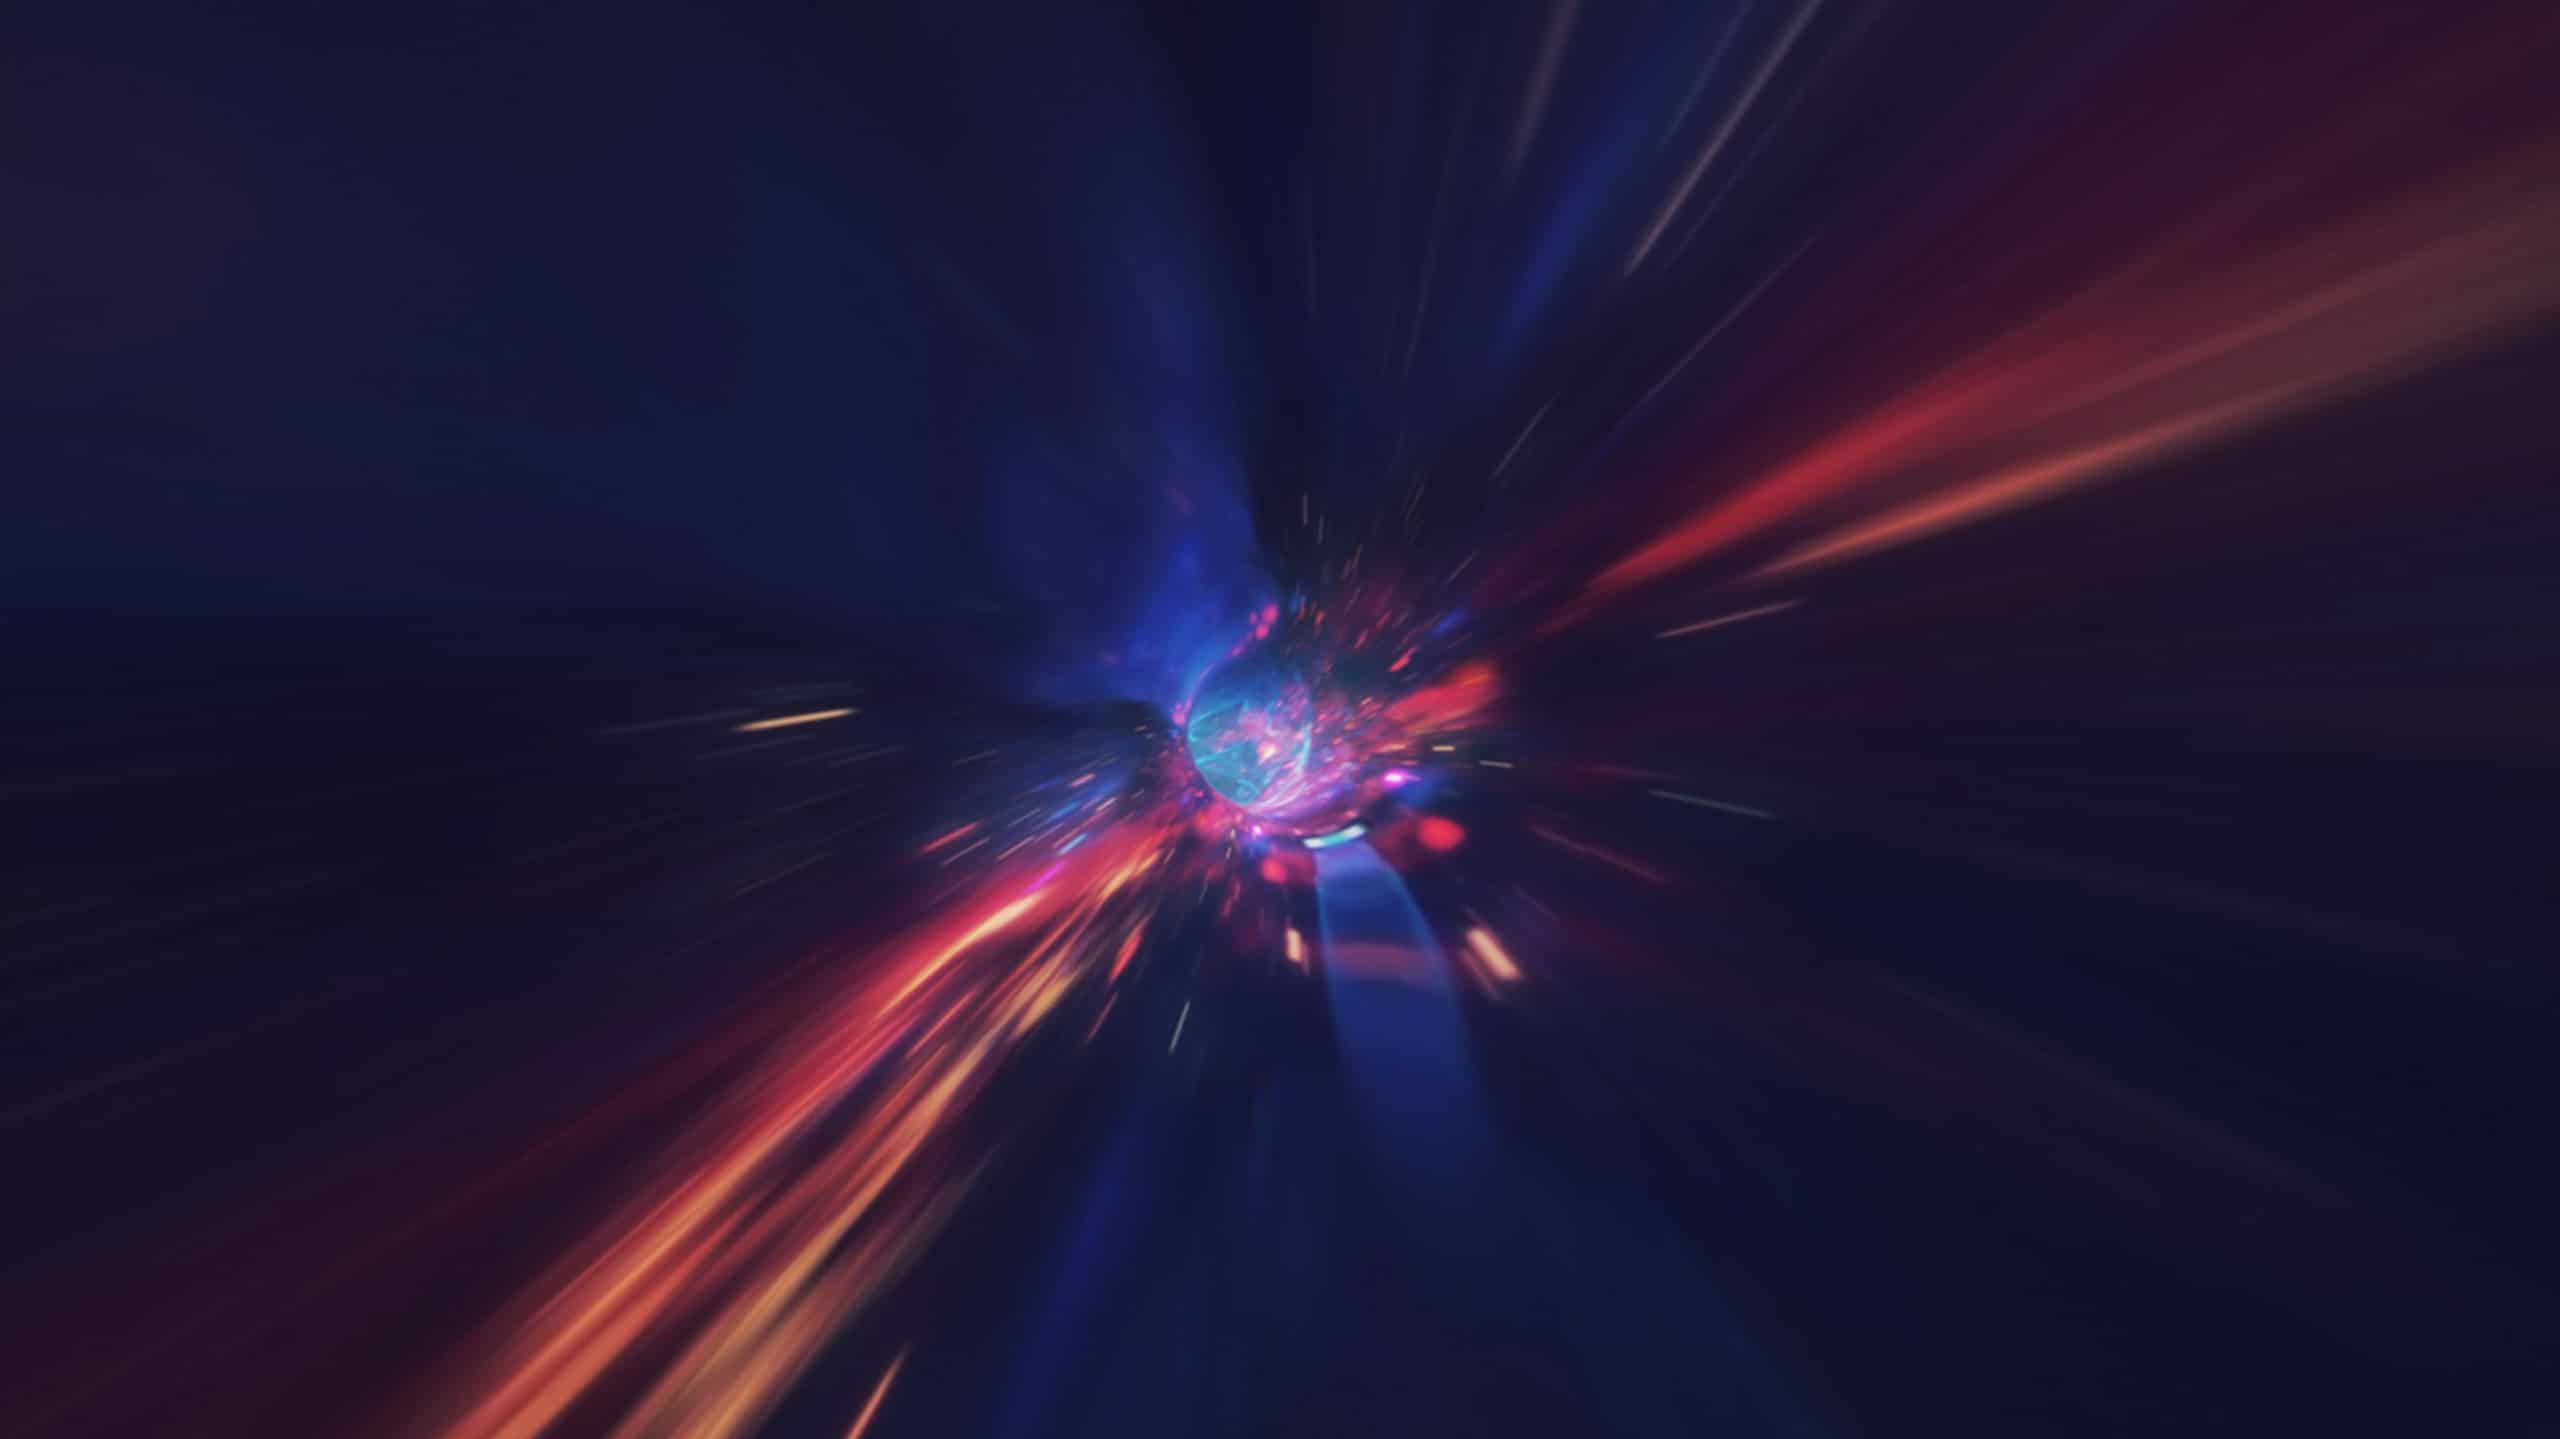 Abstract image showing a burst of light with blue and red streaks radiating from a central bright spot against a dark background, creating a dynamic, cosmic feel that evokes the concept of Zero Trust.